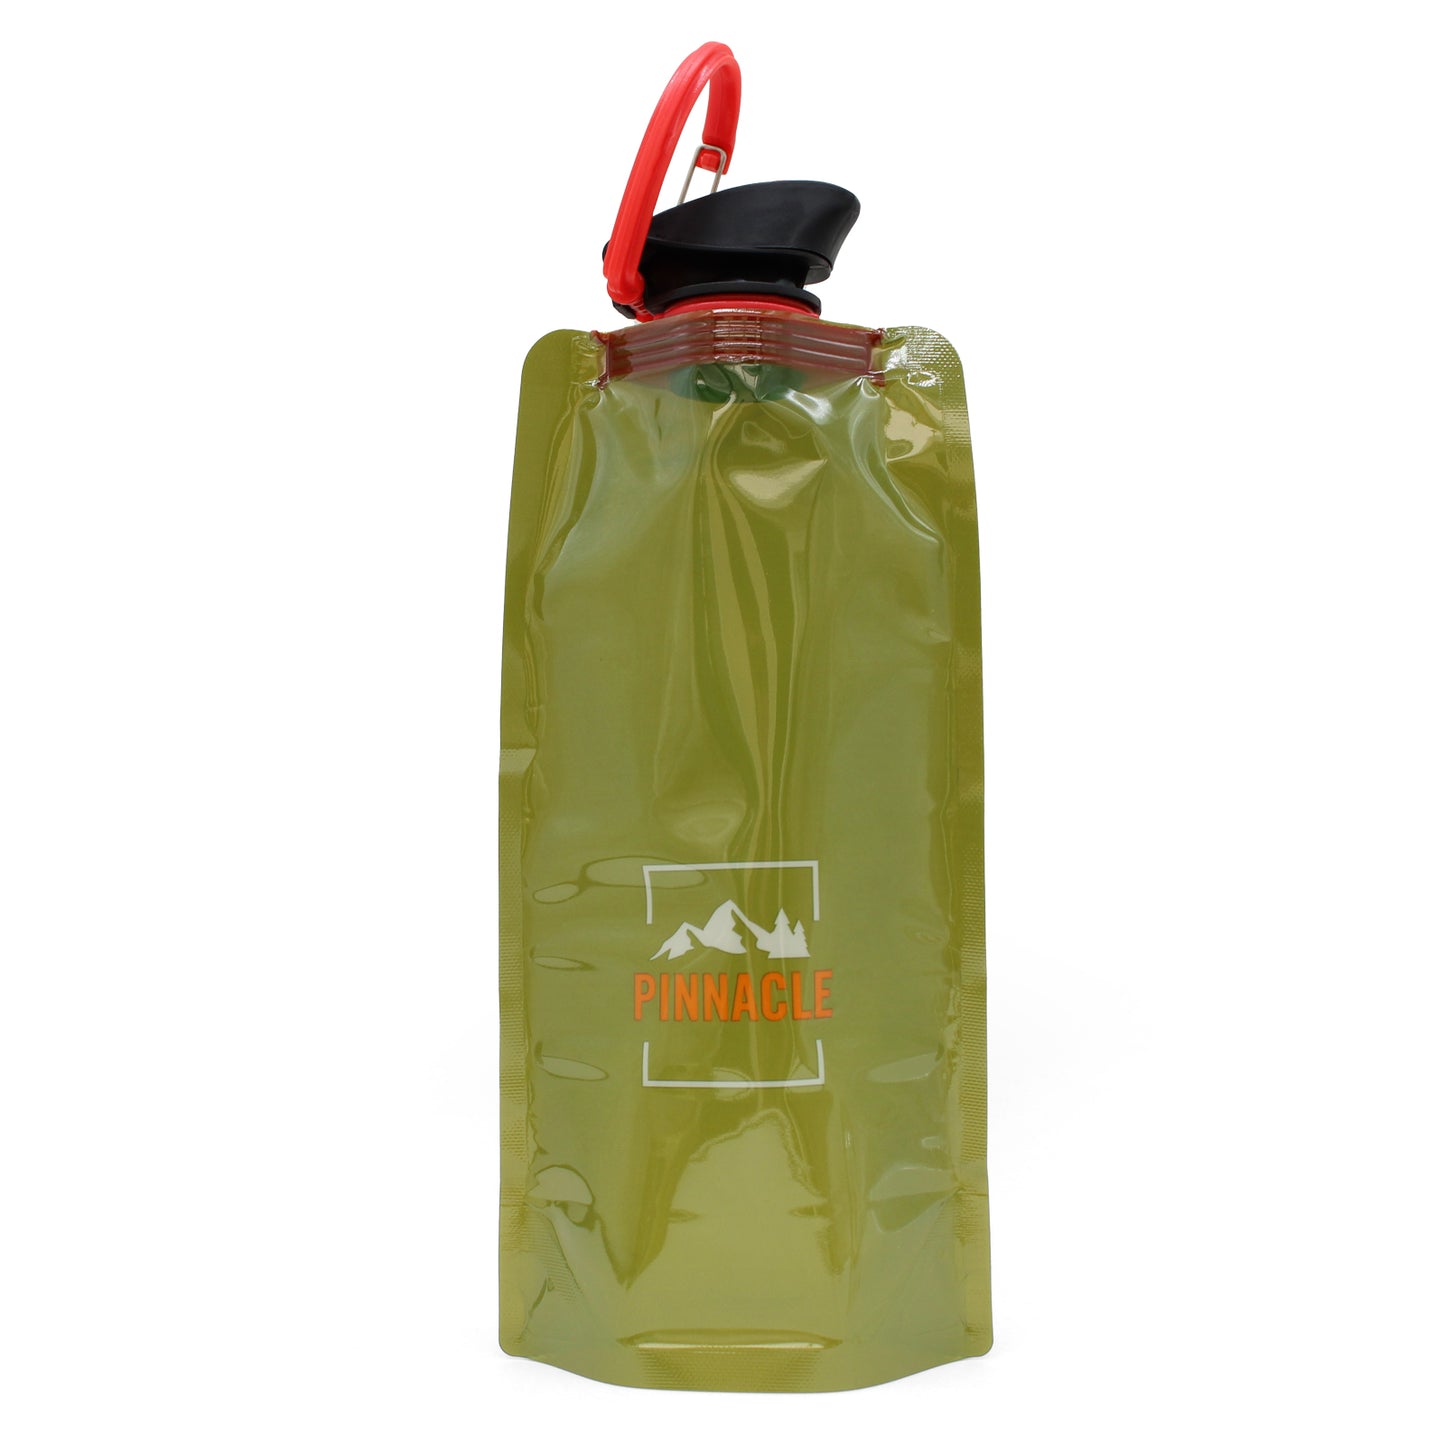 Pinnacle Collapsible Water Bottle in Green